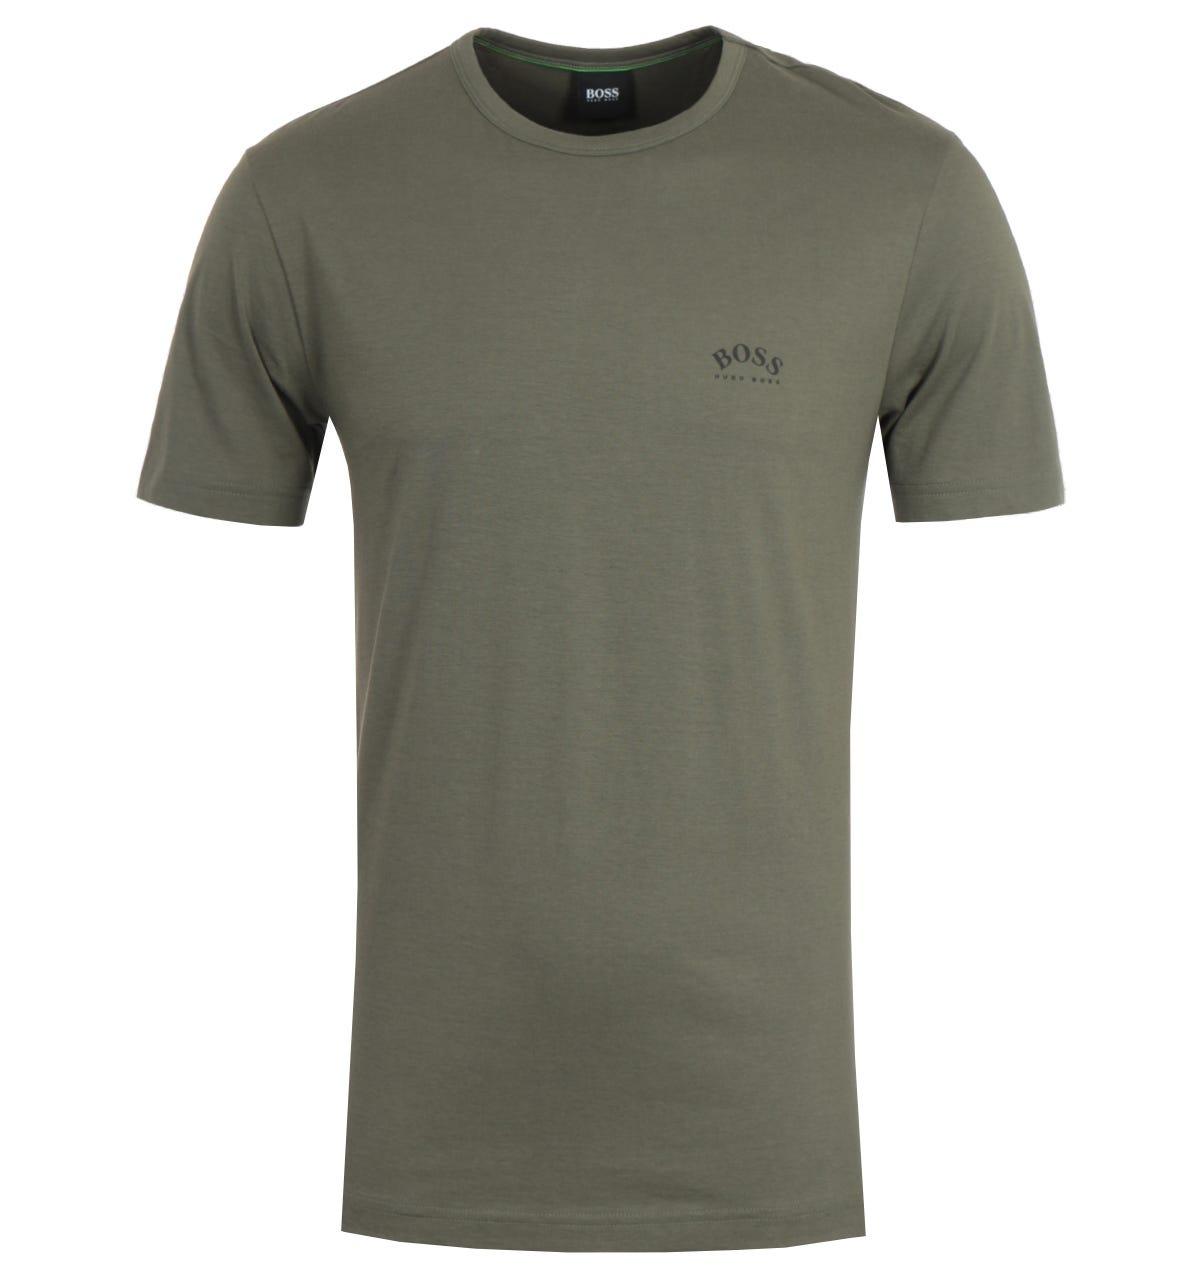 BOSS by HUGO BOSS Cotton Curved Logo T-shirt in Green for Men - Save 8% -  Lyst